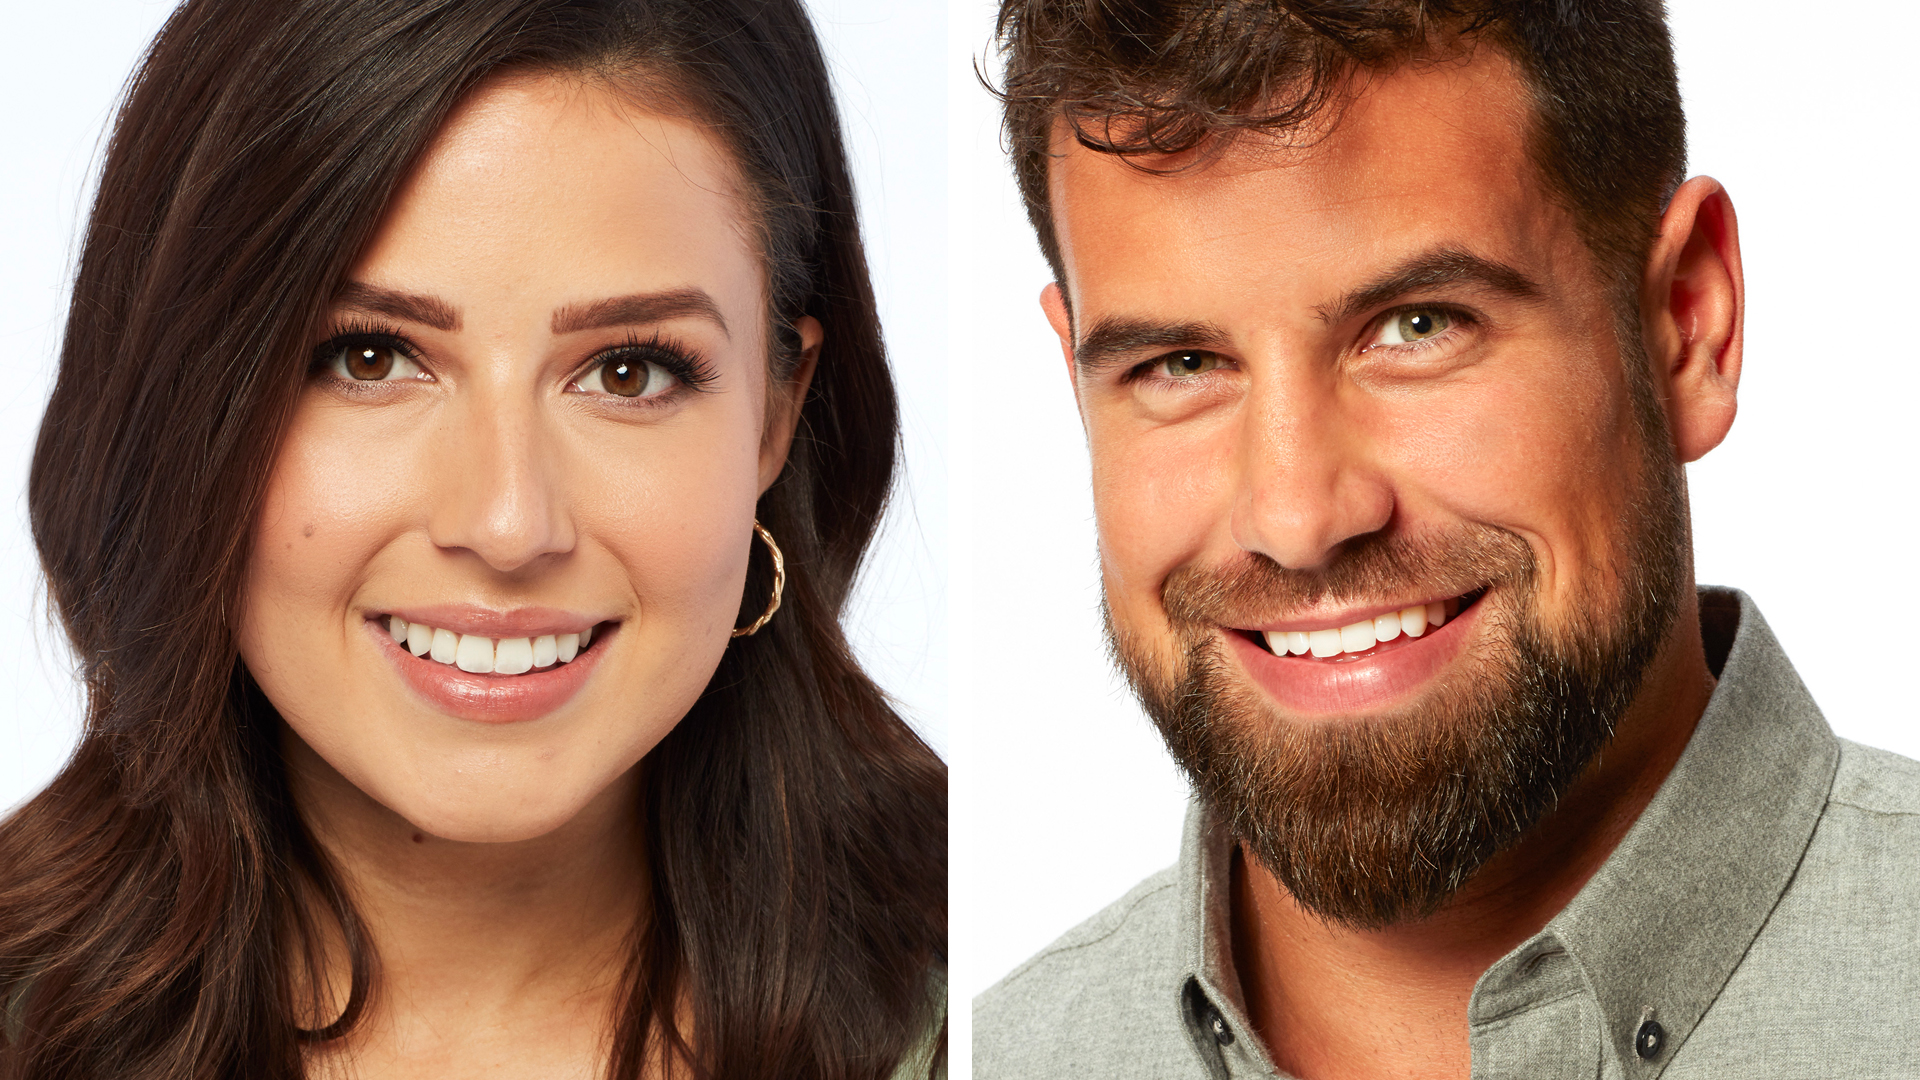 Headshots of Katie Thurston from ‘The Bachelor’ and Blake Moynes from ‘The Bachelorette’